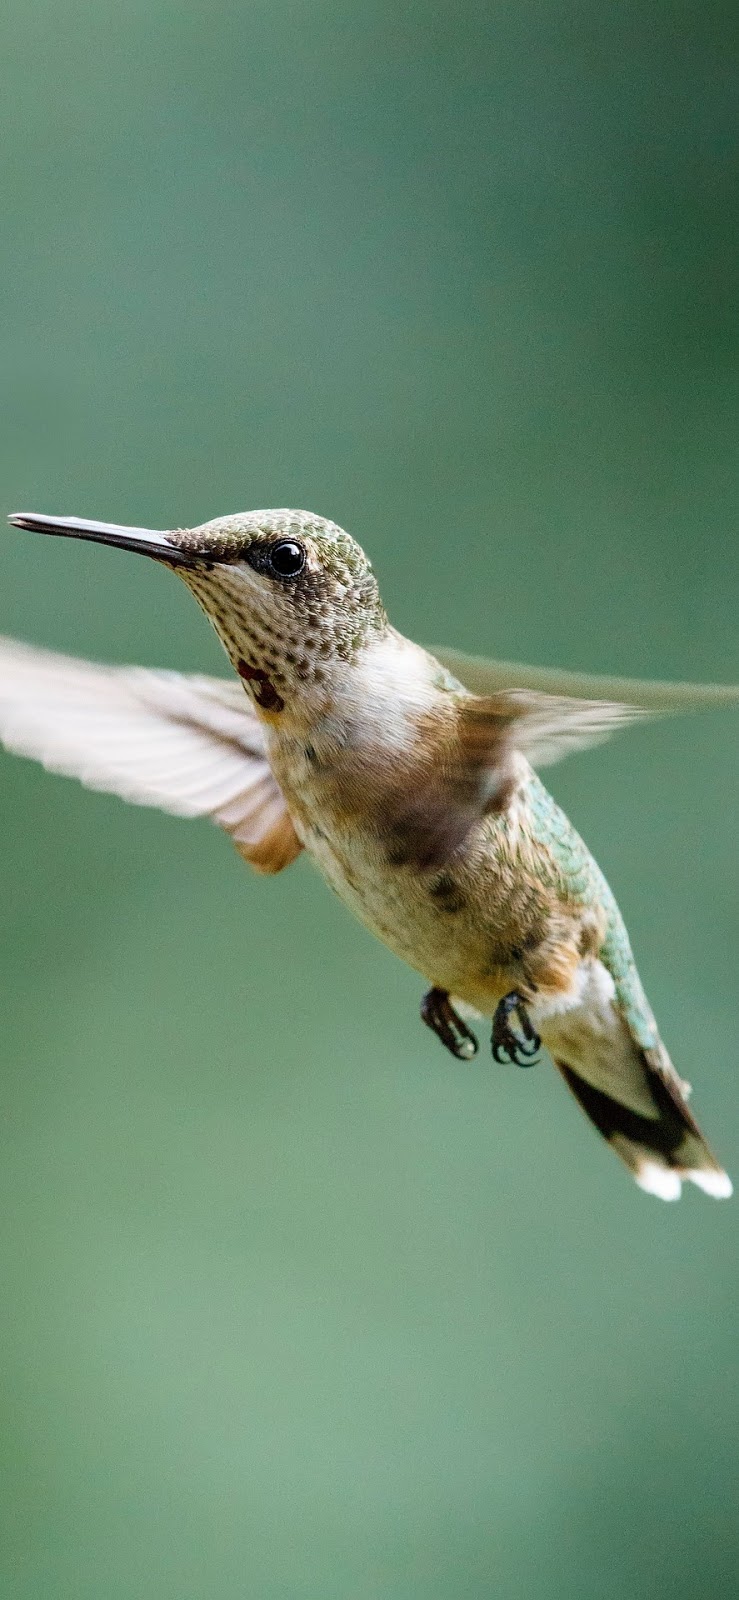  A ruby-throated hummingbird hovering.